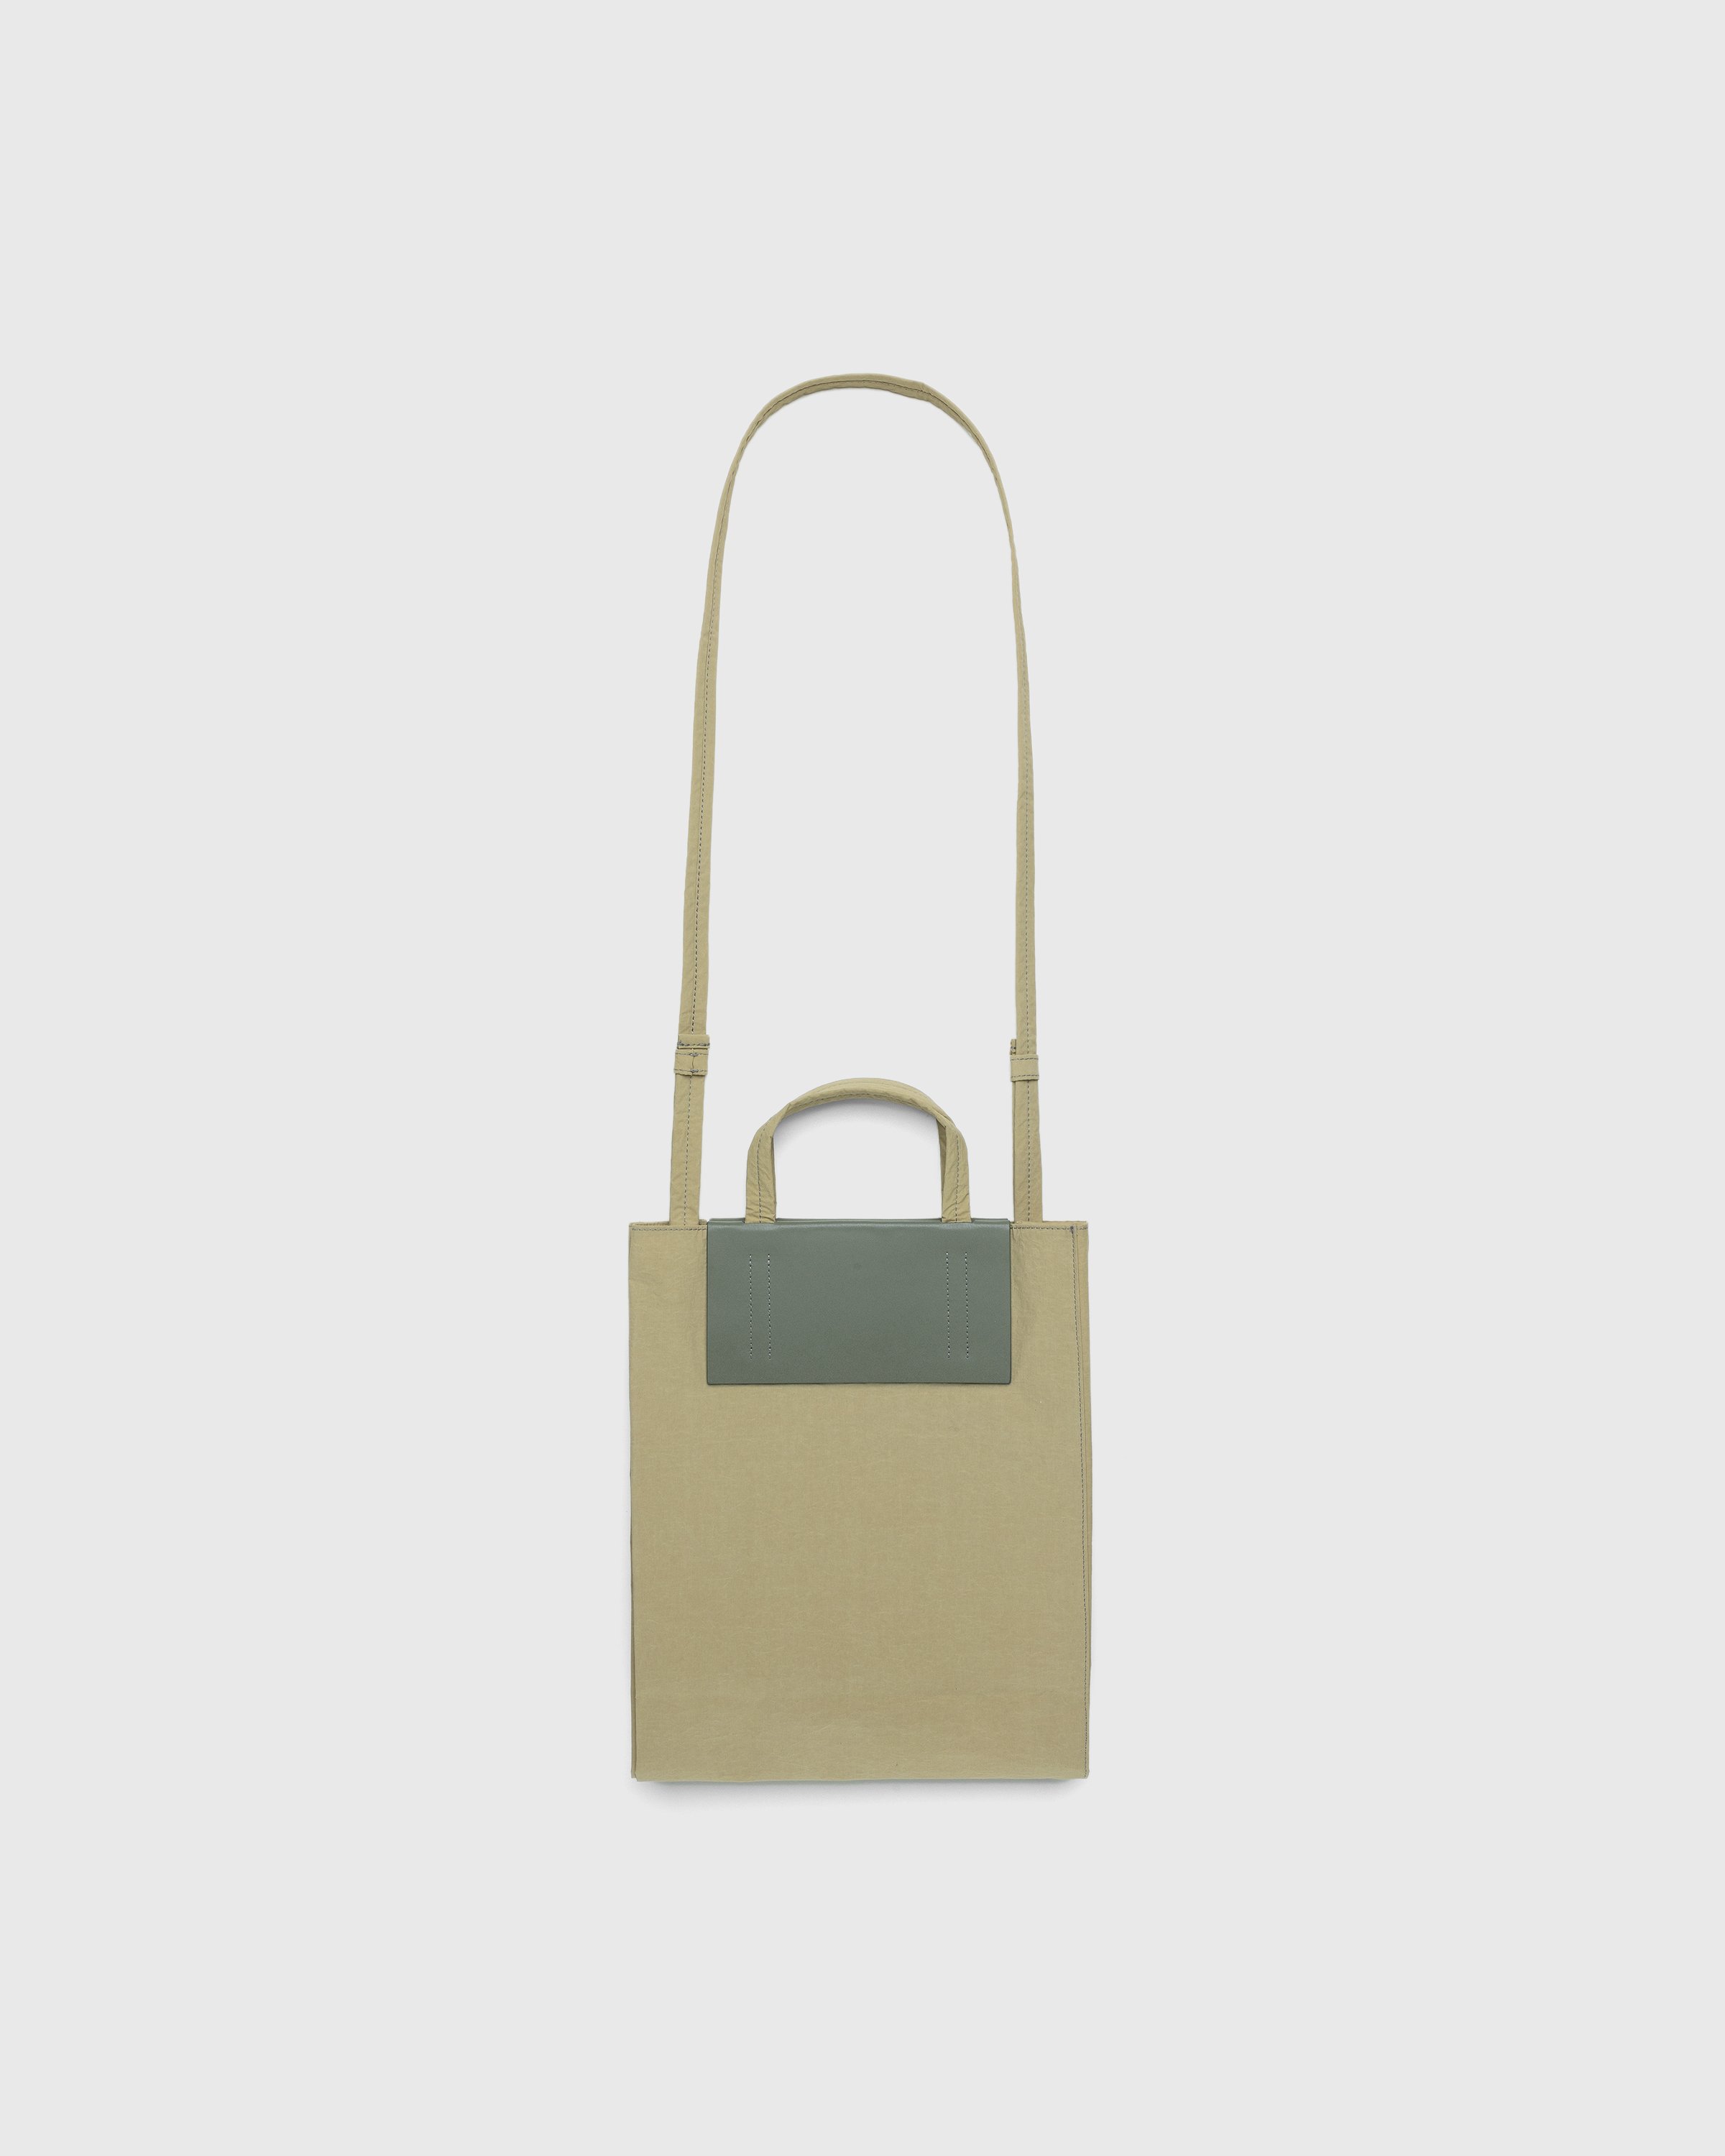 Acne Studios - Recycled Nylon Tote Bag Olive Green - Accessories - Beige - Image 2